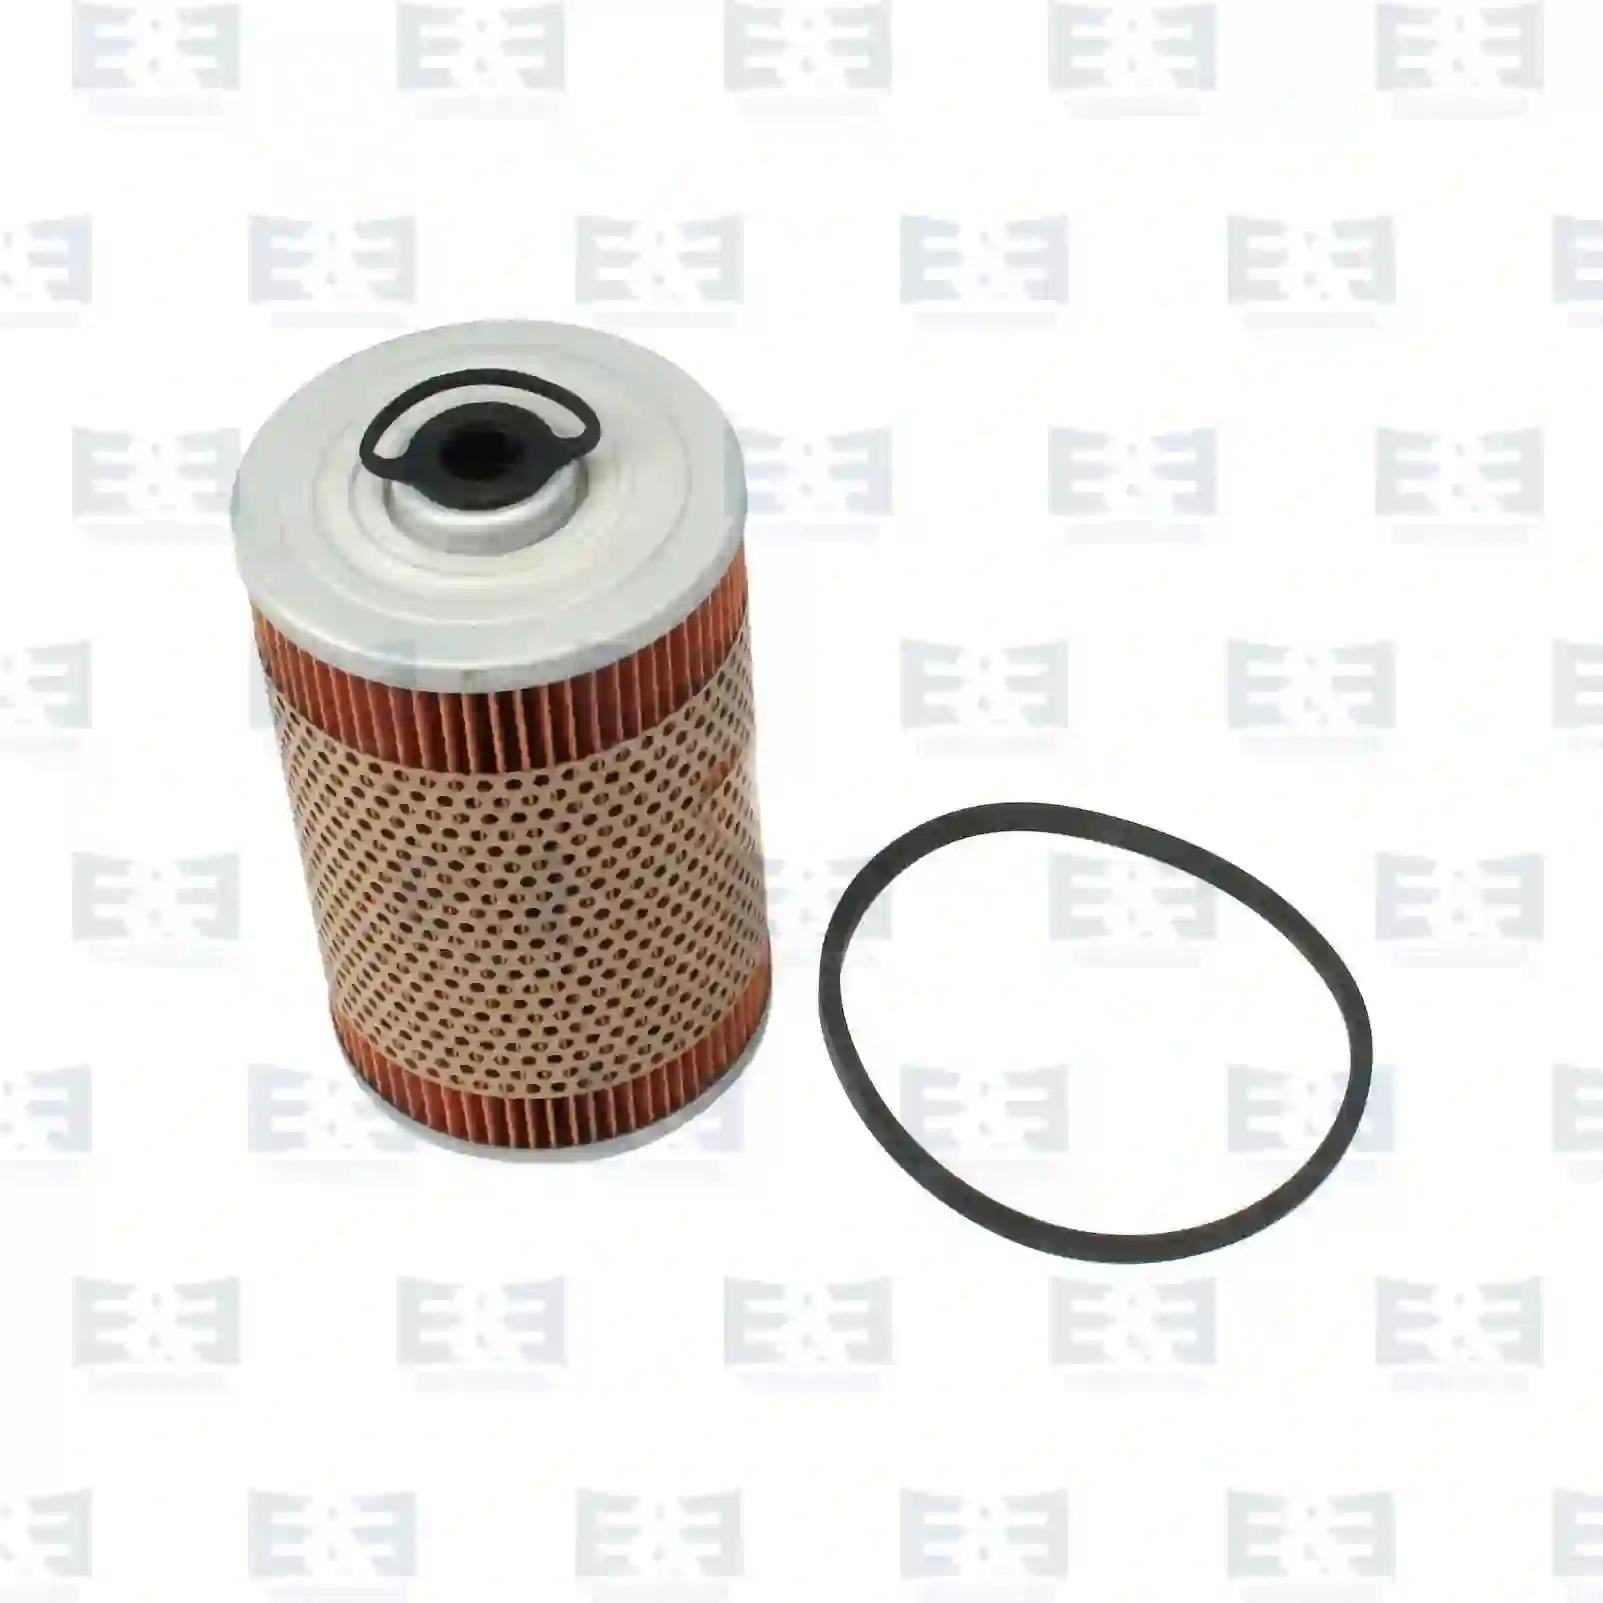 Fuel Filter, cpl. Fuel filter insert, EE No 2E2287899 ,  oem no:80034701, 243327, 801150215, 801150237, 801151161, 801151163, 801160154, 801160157, 1133275R1, 244575R91, 3029244R91, 3029245, 3029245R91, 3032014R91, 3055272R91, 3055650, 3055650R91, 3056984R1, 3059244, 3059244R1, 3059245, 3059245R91, 3059245R92, 3132014R91, 3132015, 3132015R91, 3132015R92, 318887C92, 3I-1212, 6435477, 7984347, 7984348, 9975264, 0001330350, 0001330380, 0001330381, 133829, 1500447, 1500503, 265724, ABU8563, 649911, 76038600, 902705, 90270500, 01151305, 01161545, 01168396, 01168398, 01168399, 01175893, 01181061, 01289054, 09951241, 605401910001, 605411400003, 605411420005, 605411420012, 605411510003, 605412910006, 606906880101, 0794693, 0796293, 4702263, 4790226, 01160034, 82177074, 2852007, 7984348, 9307874, 25010638, 25012645, 7984347, 7984348, 9975284, 0009831606, 0004773115, 004774515, 2914107M1, 512593000, 513173000, 5894520700, 5894520800, 5984520700, 5984520800, 5984520900, 6260152271, X885984520700, 1168407, B405364, B605304A, 1133275R1, 244575R91, 3029245, 3029245R91, 3055230R91, 3055272R91, 3055650, 3055650R91, 3059244, 3059245, 3059245R91, 3059245R92, 3132015, 3132015R91, 3132015R92, 318887C92, 6-11070620-1, 6-11070620-2, 6-11073613-0, 24152004, 24866064, 42522696, AT253935, 06502115, 06538215, 38215, 40600169, 40700148, 40700306, 01168398, 01175893, 01181061, 01289054, 09951241, 90951241, F542, F543, F599, 7999921099, 08508111, 5502259, 5502263, 5502268, 7001222, 11225042015, 81000000246, 81125030011, 81125030018, 81125030021, 81125030022, 81125030024, 81125030042, 81125030046, 81125030048, 81125030053, 81125030054, 81125030062, 81125030063, 81125030064, 81125030066, 81125030076, N1014015571, 133602C0, 1818471M1, 2914220M1, 0002105100, 0004773115, 0004773515, 0004774015, 0004774515, 0004777215, 0004777515, 3214770015, 3440927045, 3440927405, 3554700092, 3554700192, 4220920051, 8319101190, 9455080200, 4730200134, 01175893, 605410220038, 605411400003, 605411420005, 605411420012, 605412910006, 606906880101, 905411510003, 9455080200, 801151161, 801160154, 801160157, 0150578, 150578, 50578, 8888622, D8888622, 0003005826, 5984520700, 133829, 245301, 265724, 5502259, 78120, 78245, 78709, 00107800, 00107807, 8508111, 152875, 62325, 5894520800, 83191011190, 8319101200, 83191261610, 185550065, 185550066, 540208001B01, 540208001BO1, 540208001BO2, 5402080B01, 5402080B02, 614080739, 614080740, 614090739, 4011024630, 215450, 4531012, 3201438, 233897, 243619, 2528215, 3815857, 74406, 76649, 140518714, 6206R109 E&E Truck Spare Parts | Truck Spare Parts, Auotomotive Spare Parts